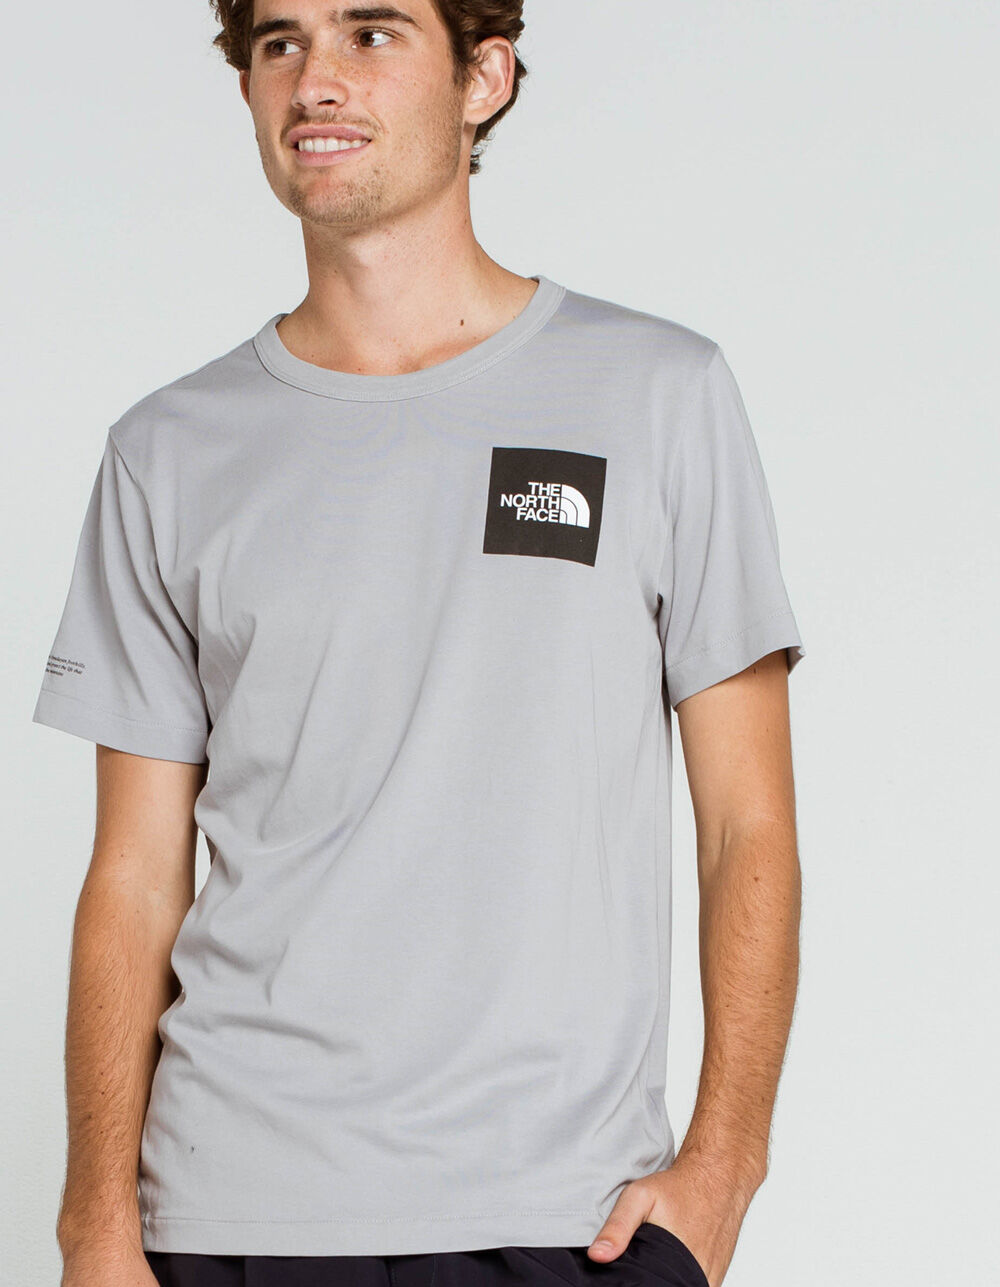 THE NORTH FACE Himalayan Bottle Source Mens T-Shirt - GRAY | Tillys